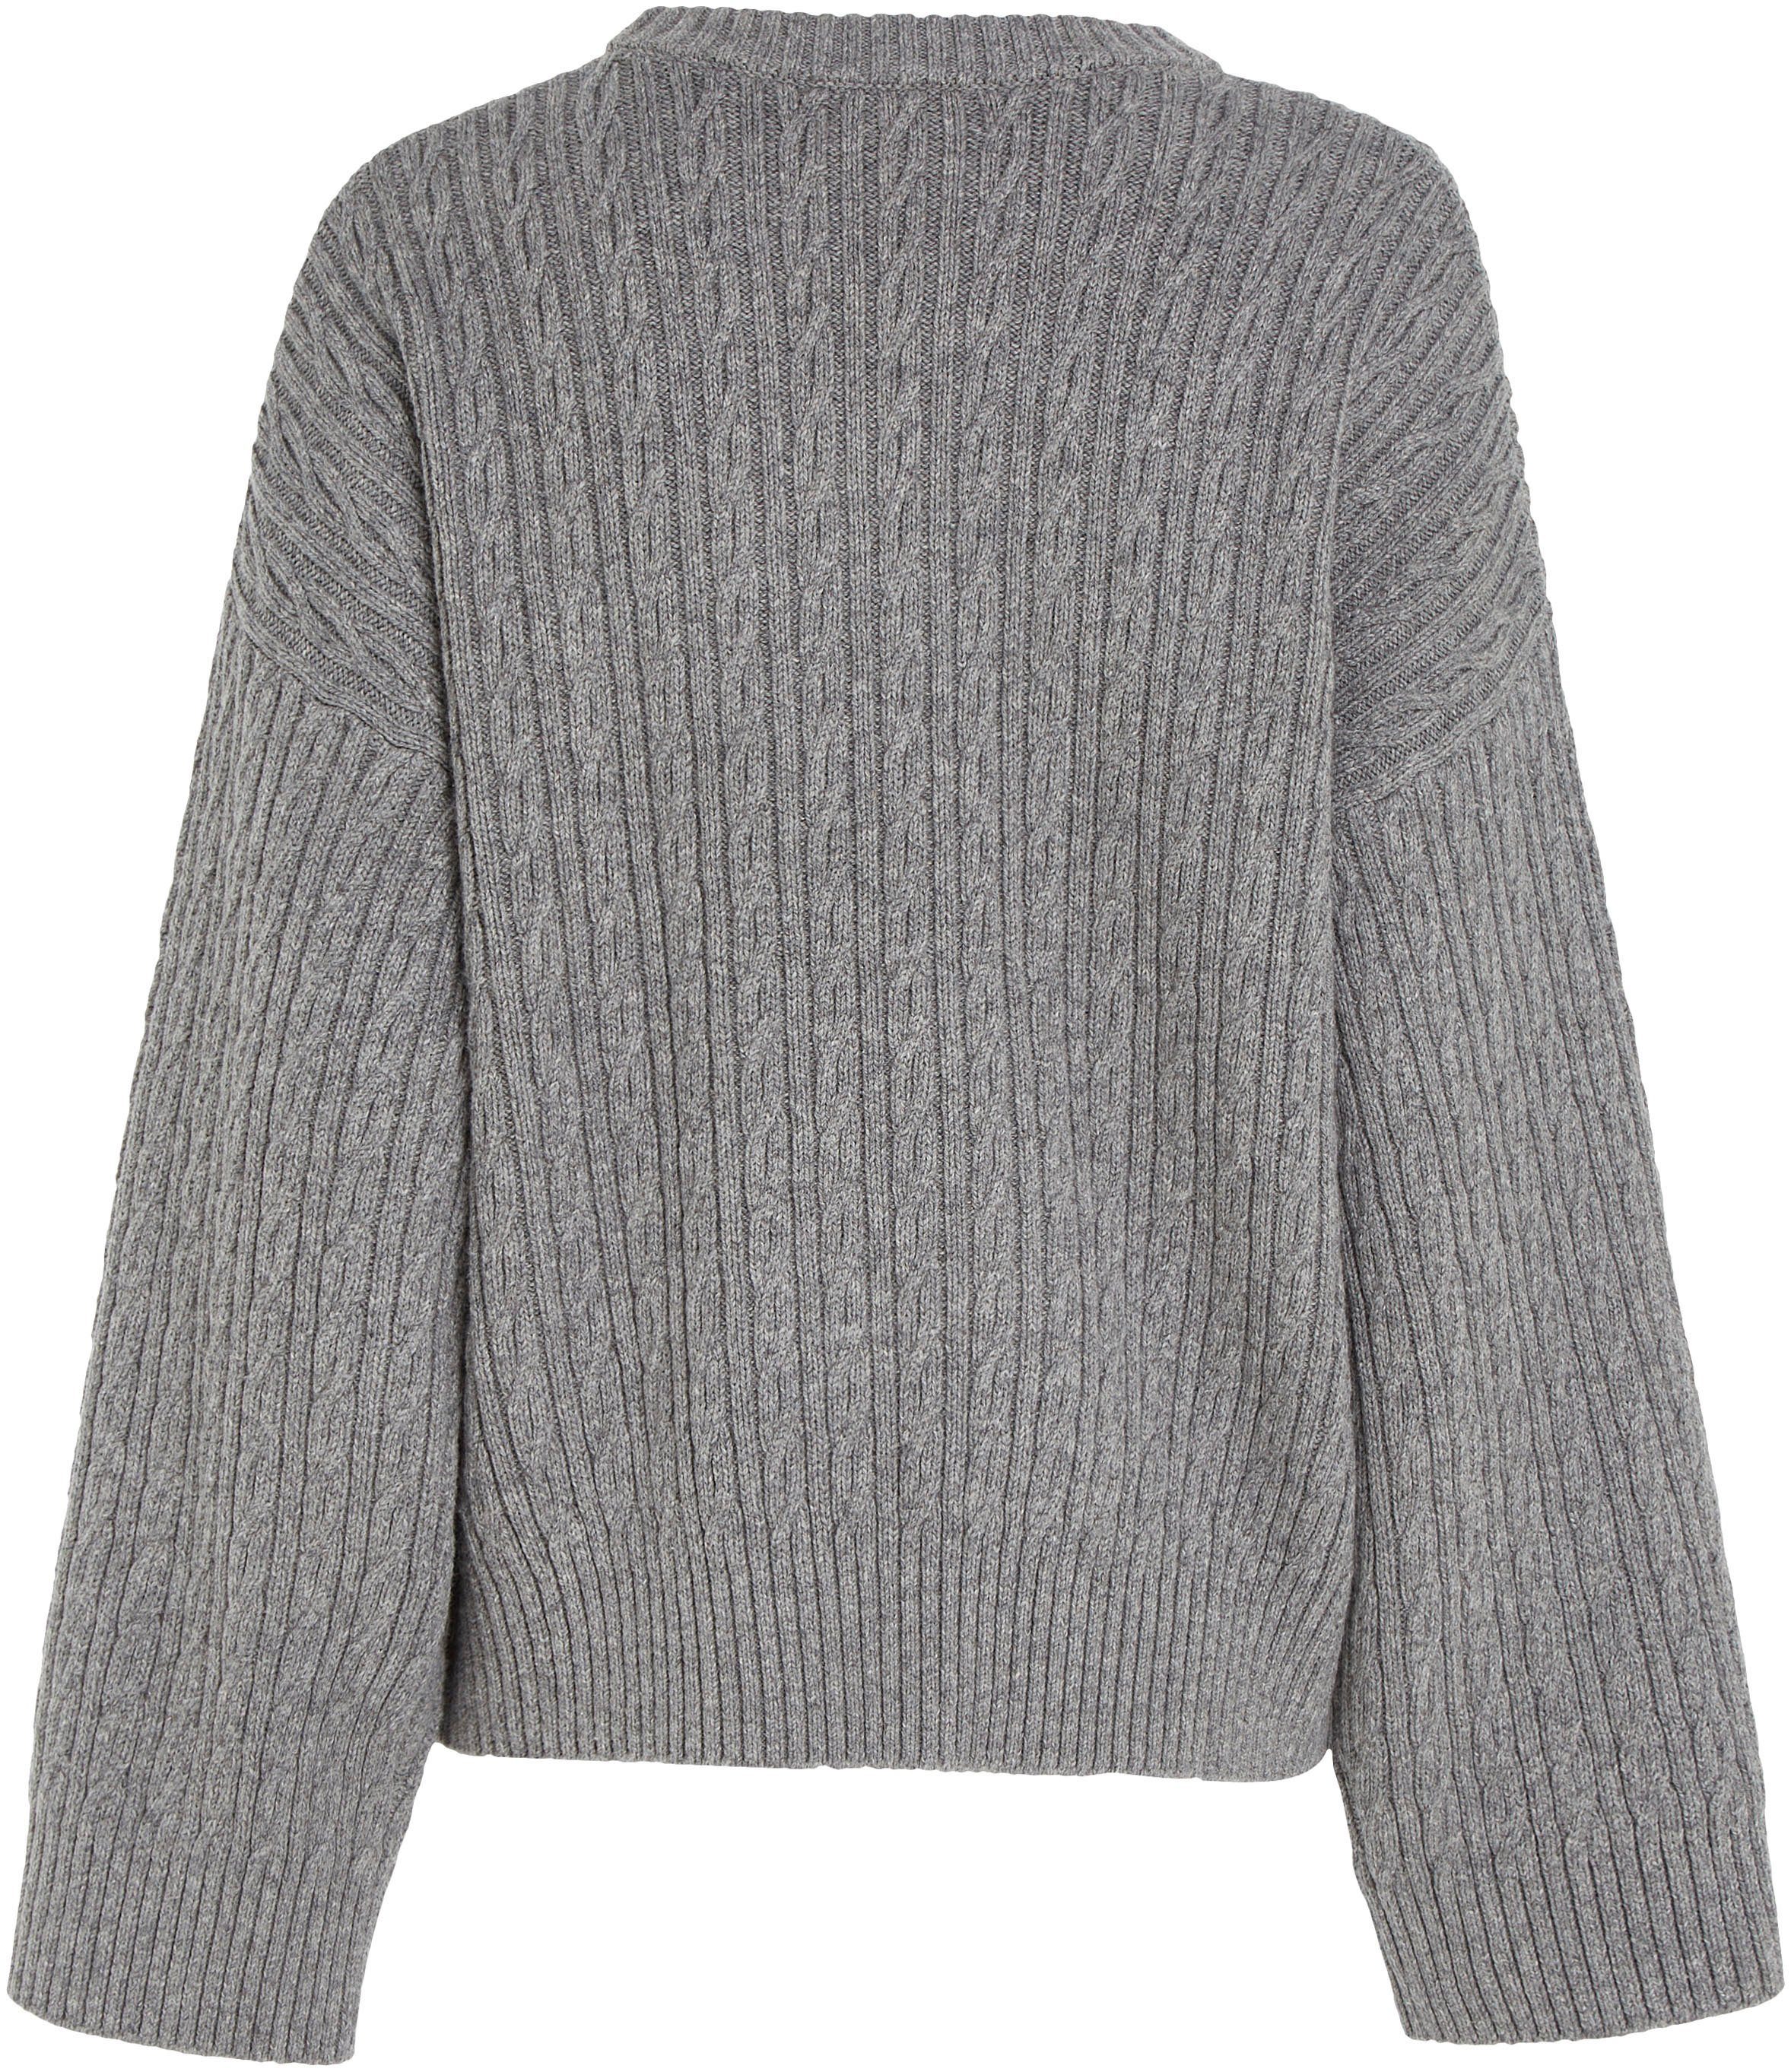 ALL SWEATER CABLE allover OVER Med_Heather_Grey Rundhalspullover mit Tommy Hilfiger Zopfmuster C-NK